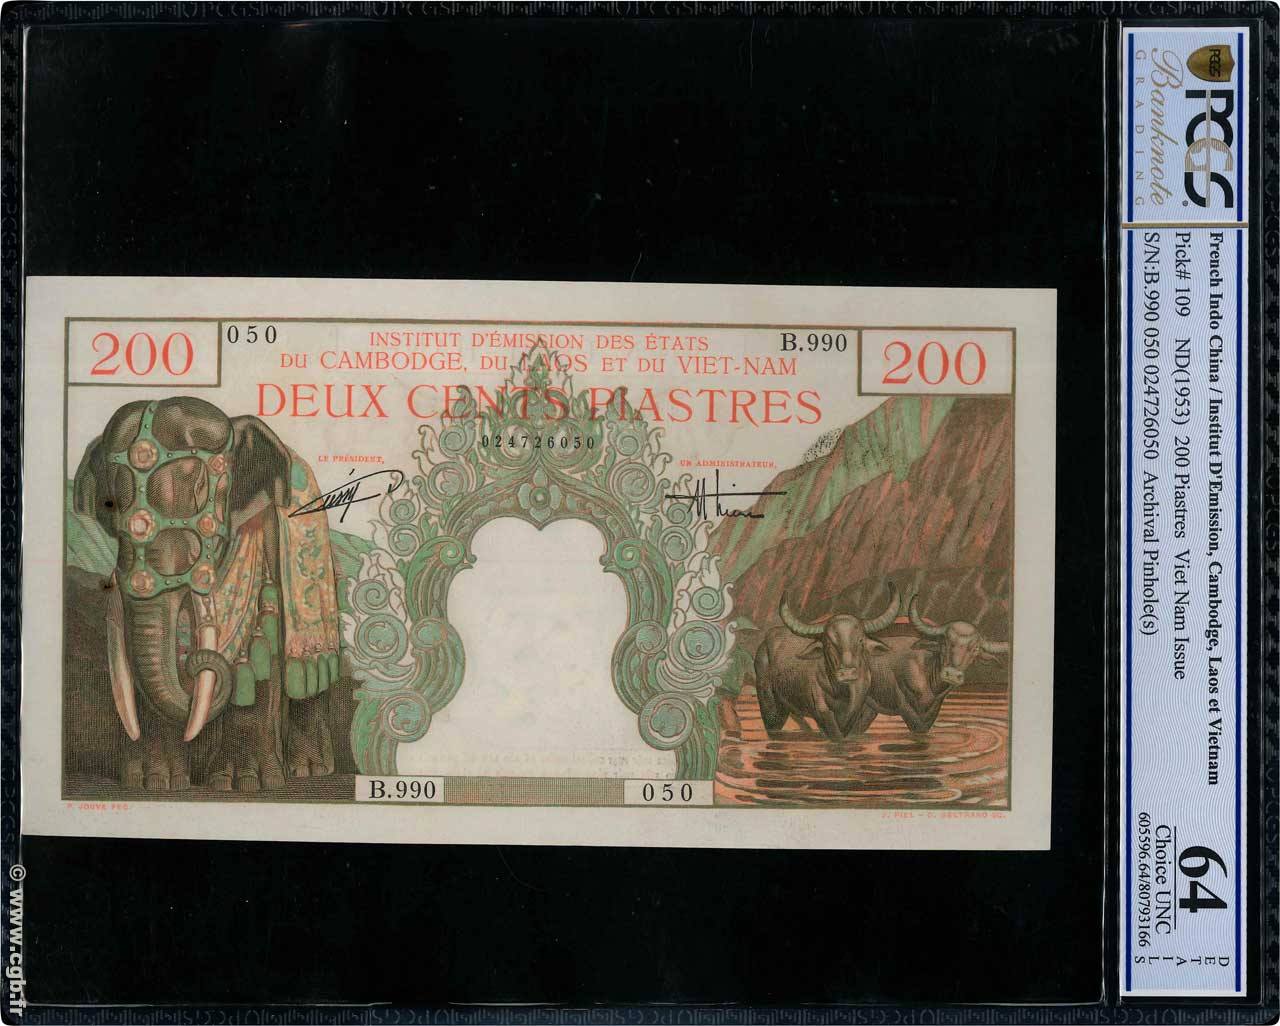 200 Piastres - 200 Dong FRENCH INDOCHINA  1953 P.109 AU